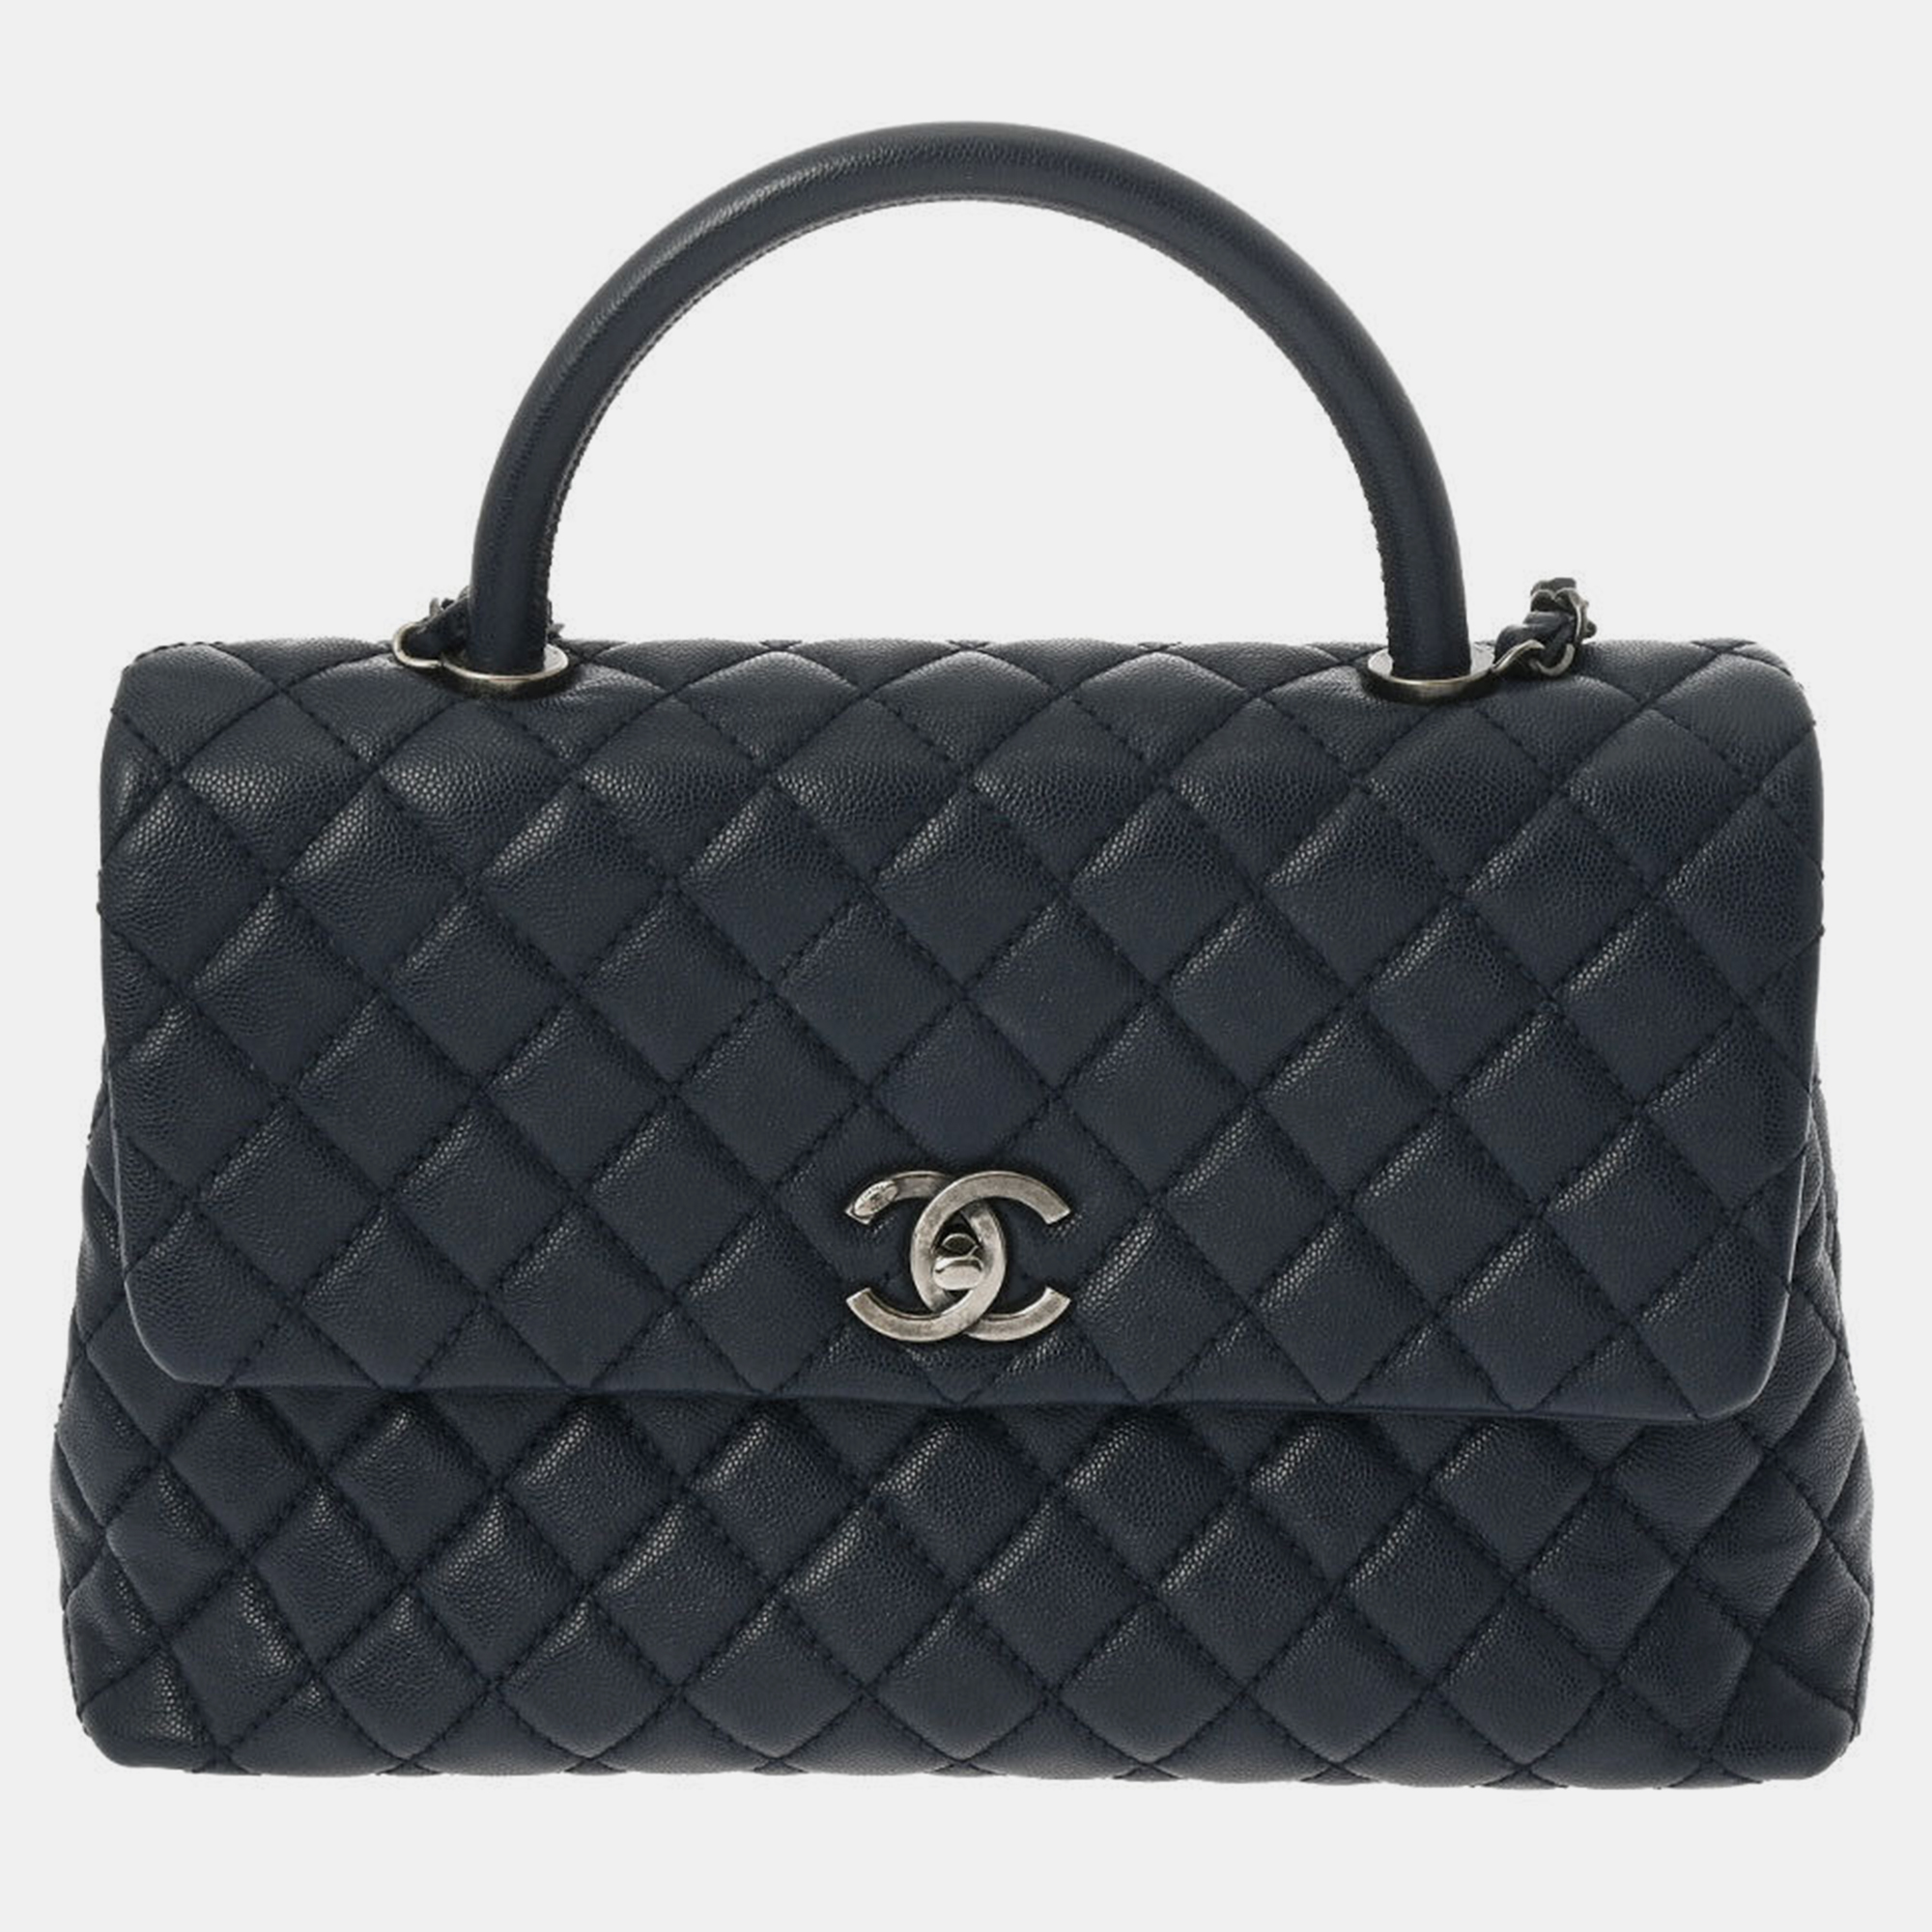 Chanel navy blue caviar leather coco top handle bag